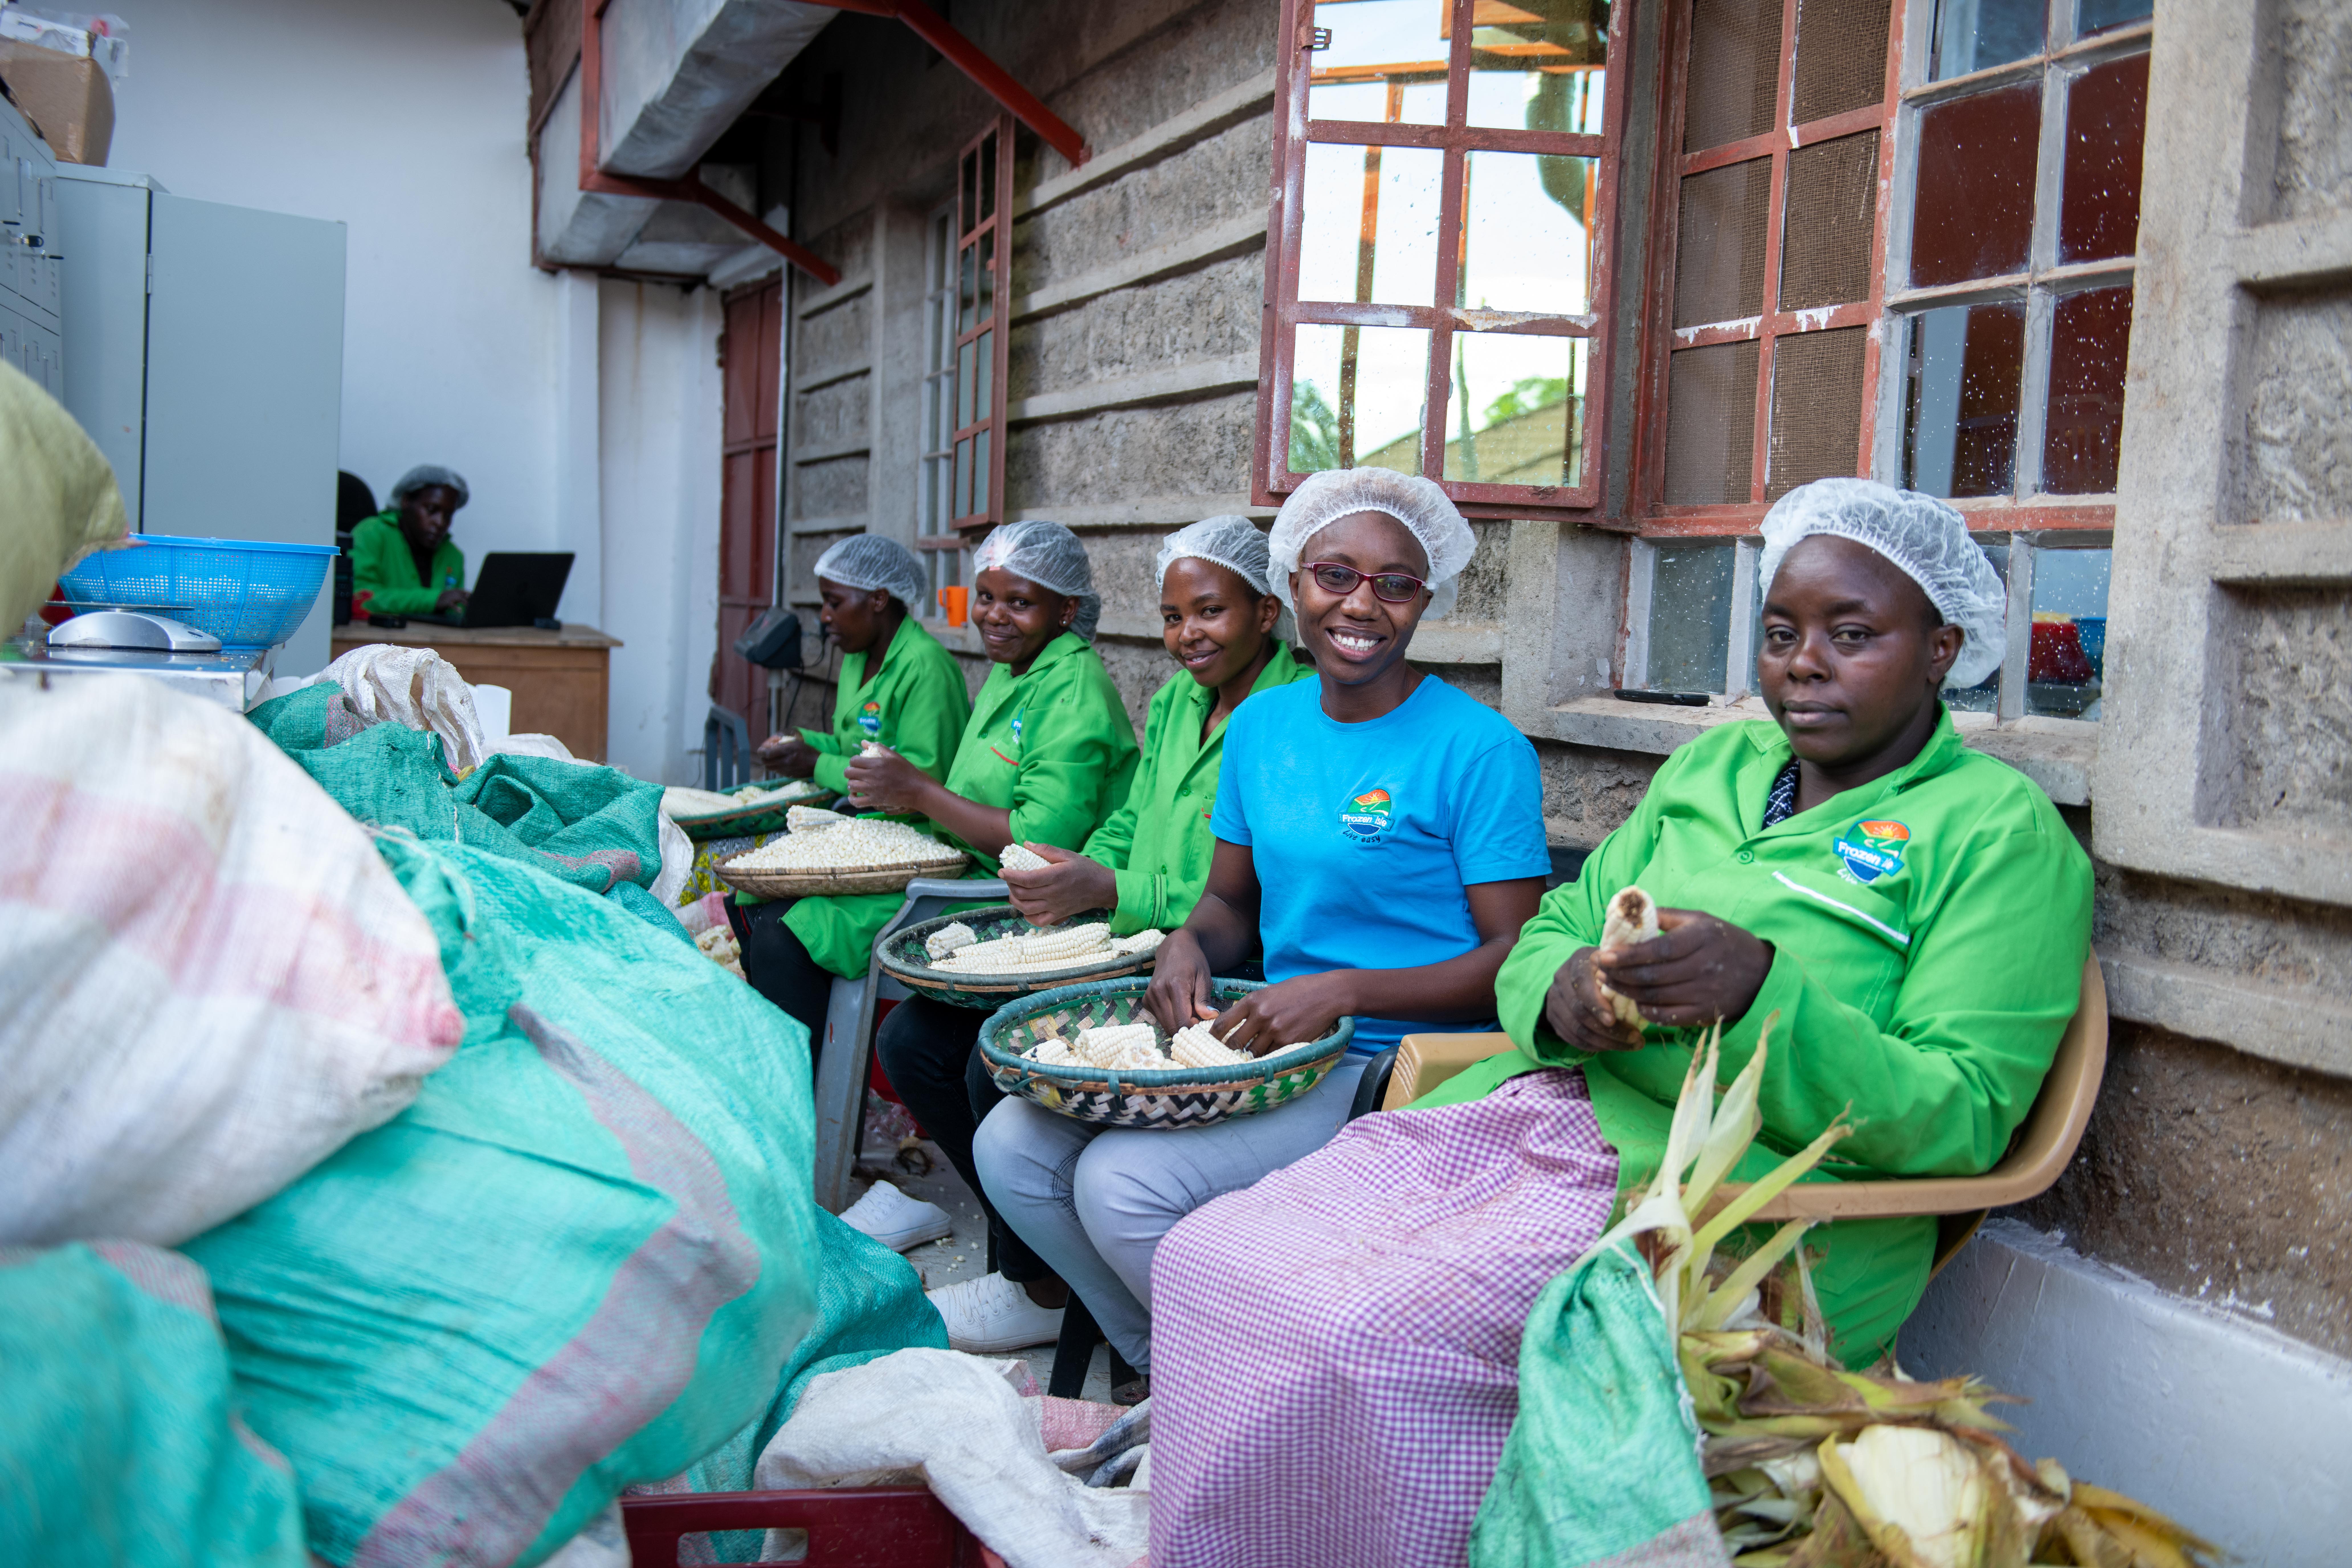 Florence and her team sit together and peel corncobs. Copyright: WIDU.africa